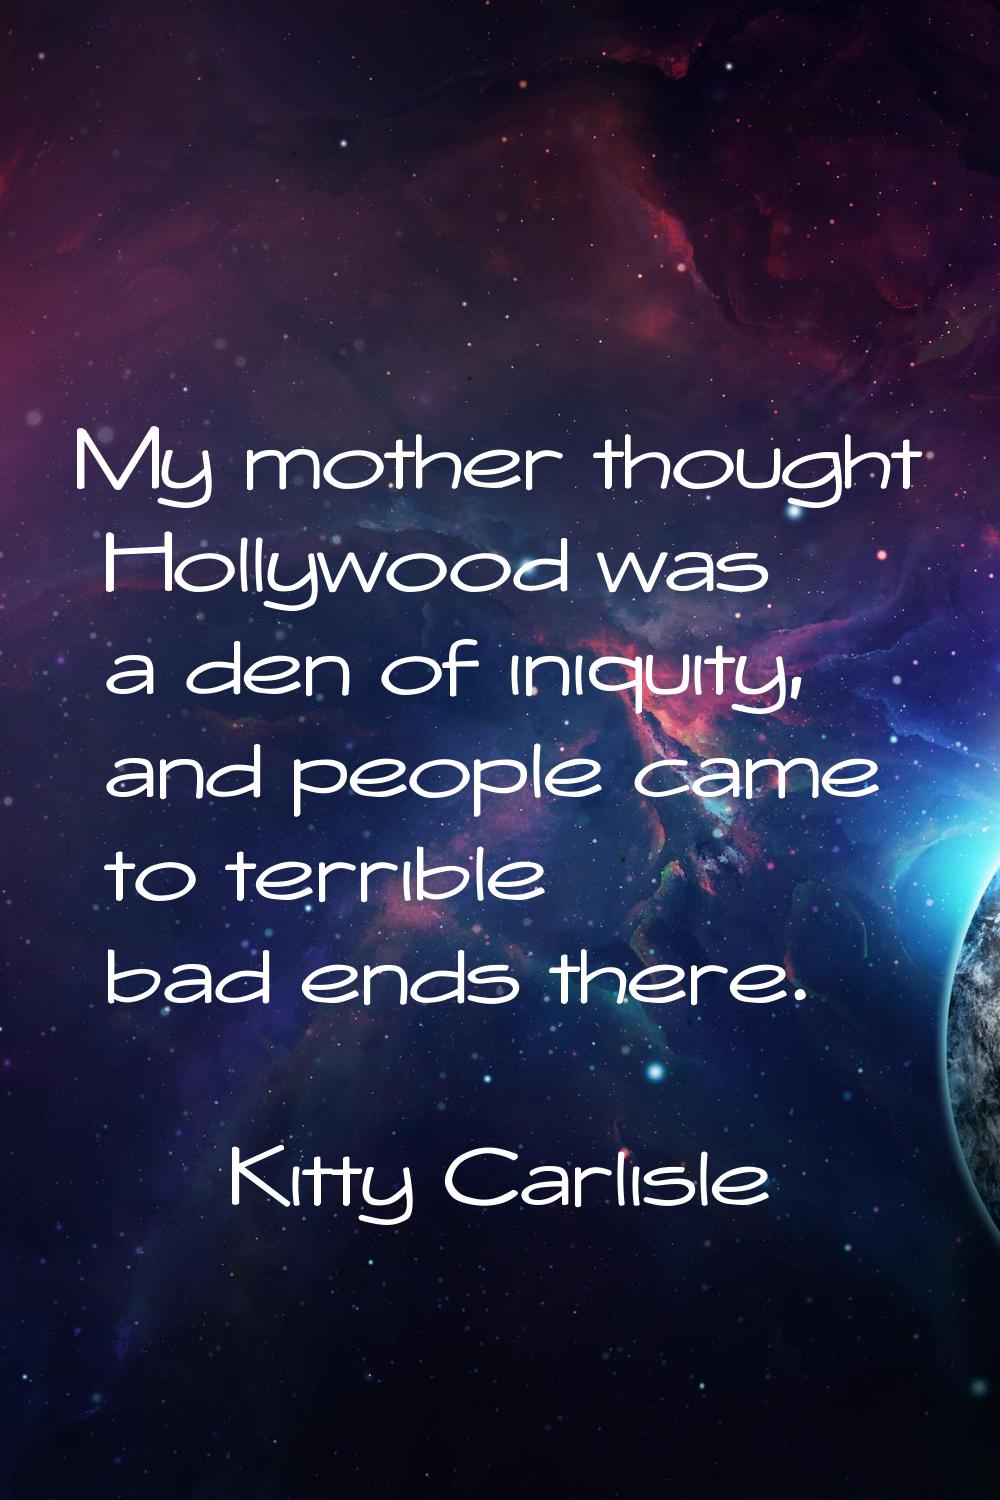 My mother thought Hollywood was a den of iniquity, and people came to terrible bad ends there.